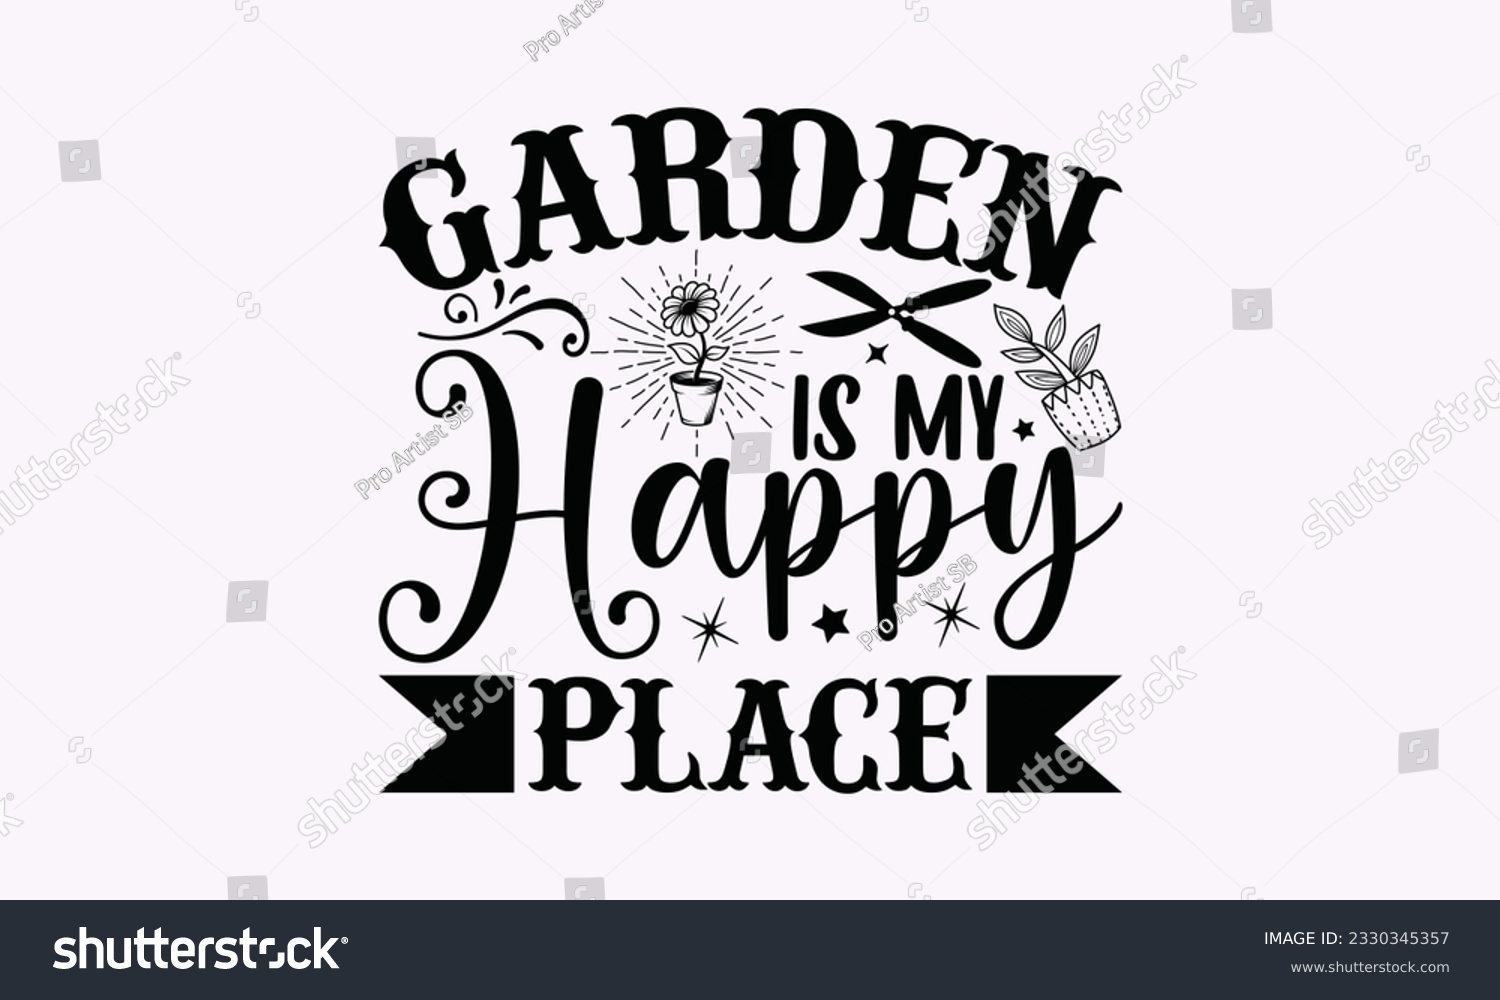 SVG of Garden is my happy place - Gardening SVG Design, plant Quotes, Hand drawn lettering phrase, Isolated on white background. svg